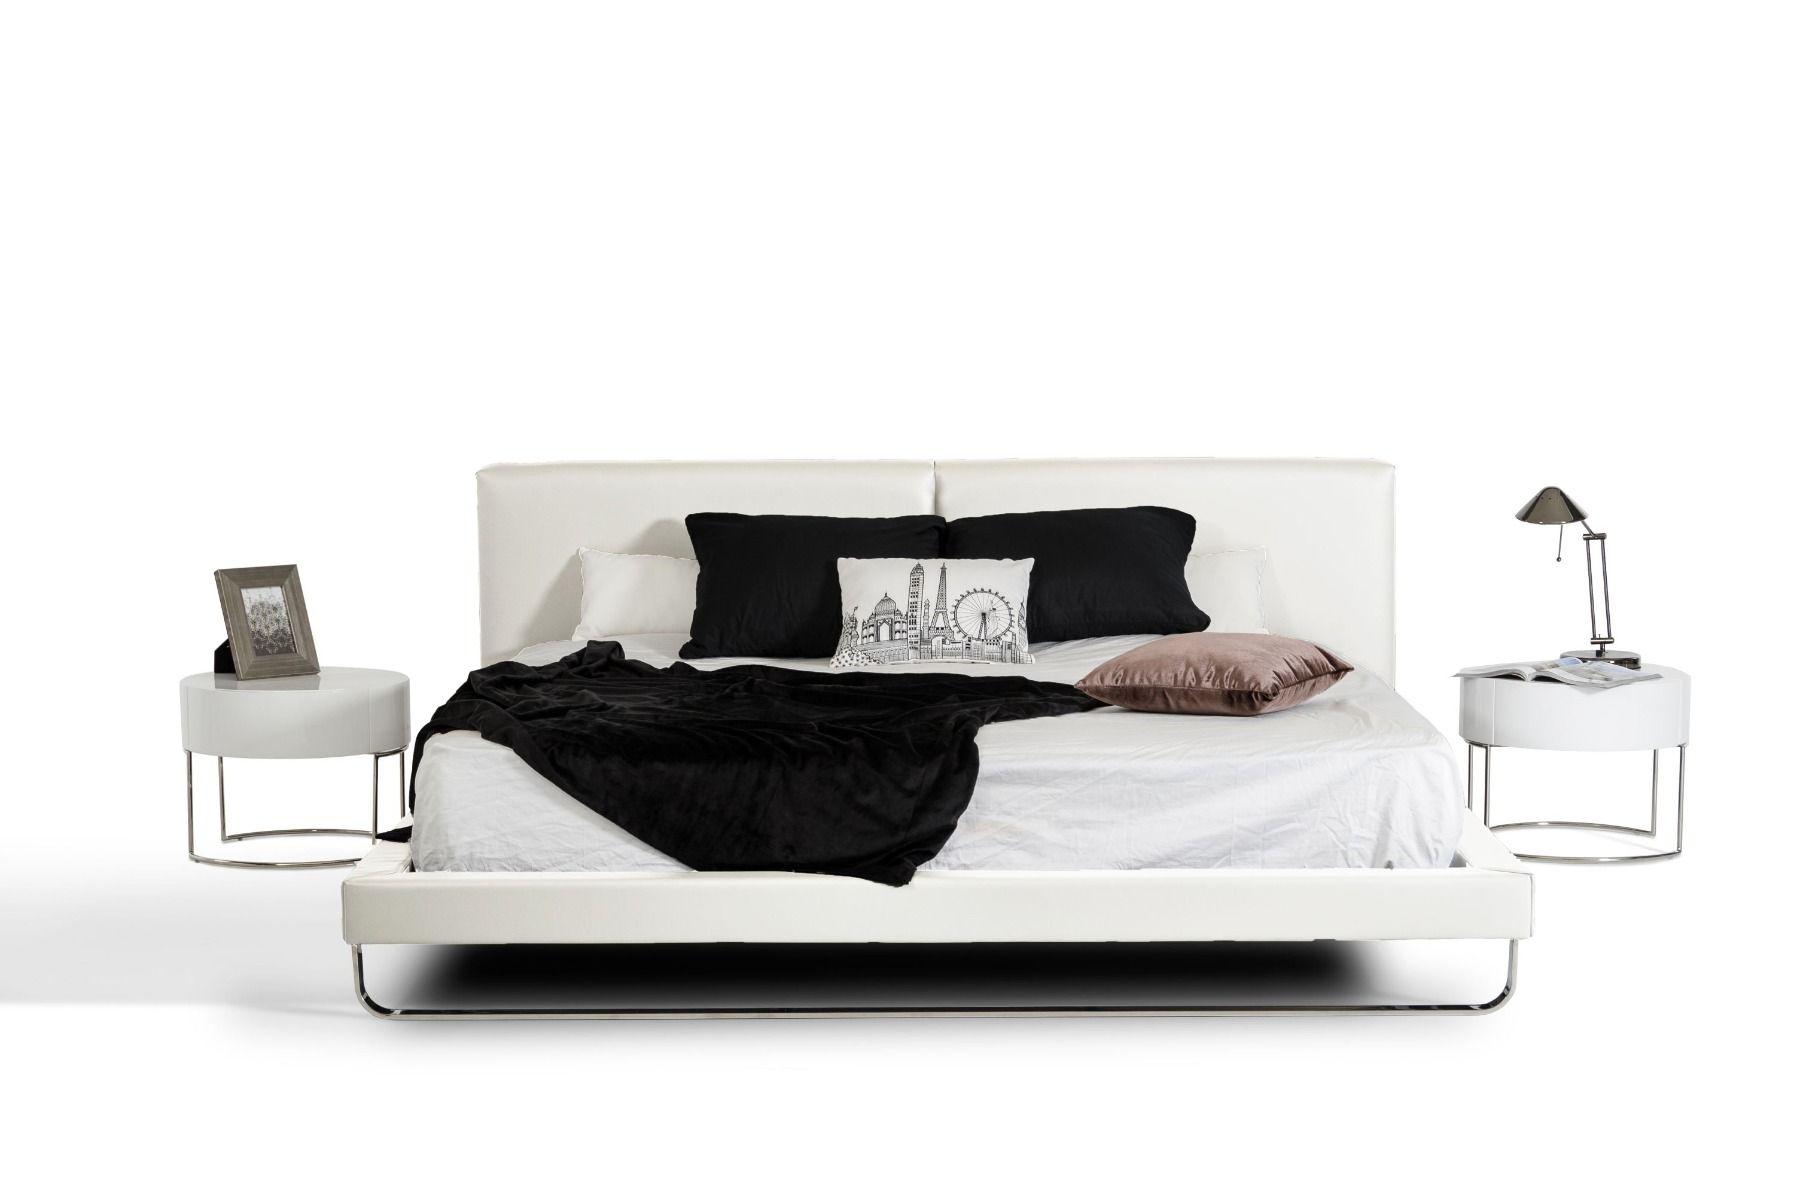 Contemporary, Modern Platform Bed Modrest Ramona Queen Bed VGJY-4016-WHT-BED-Q VGJY-4016-WHT-BED-Q in White Leatherette